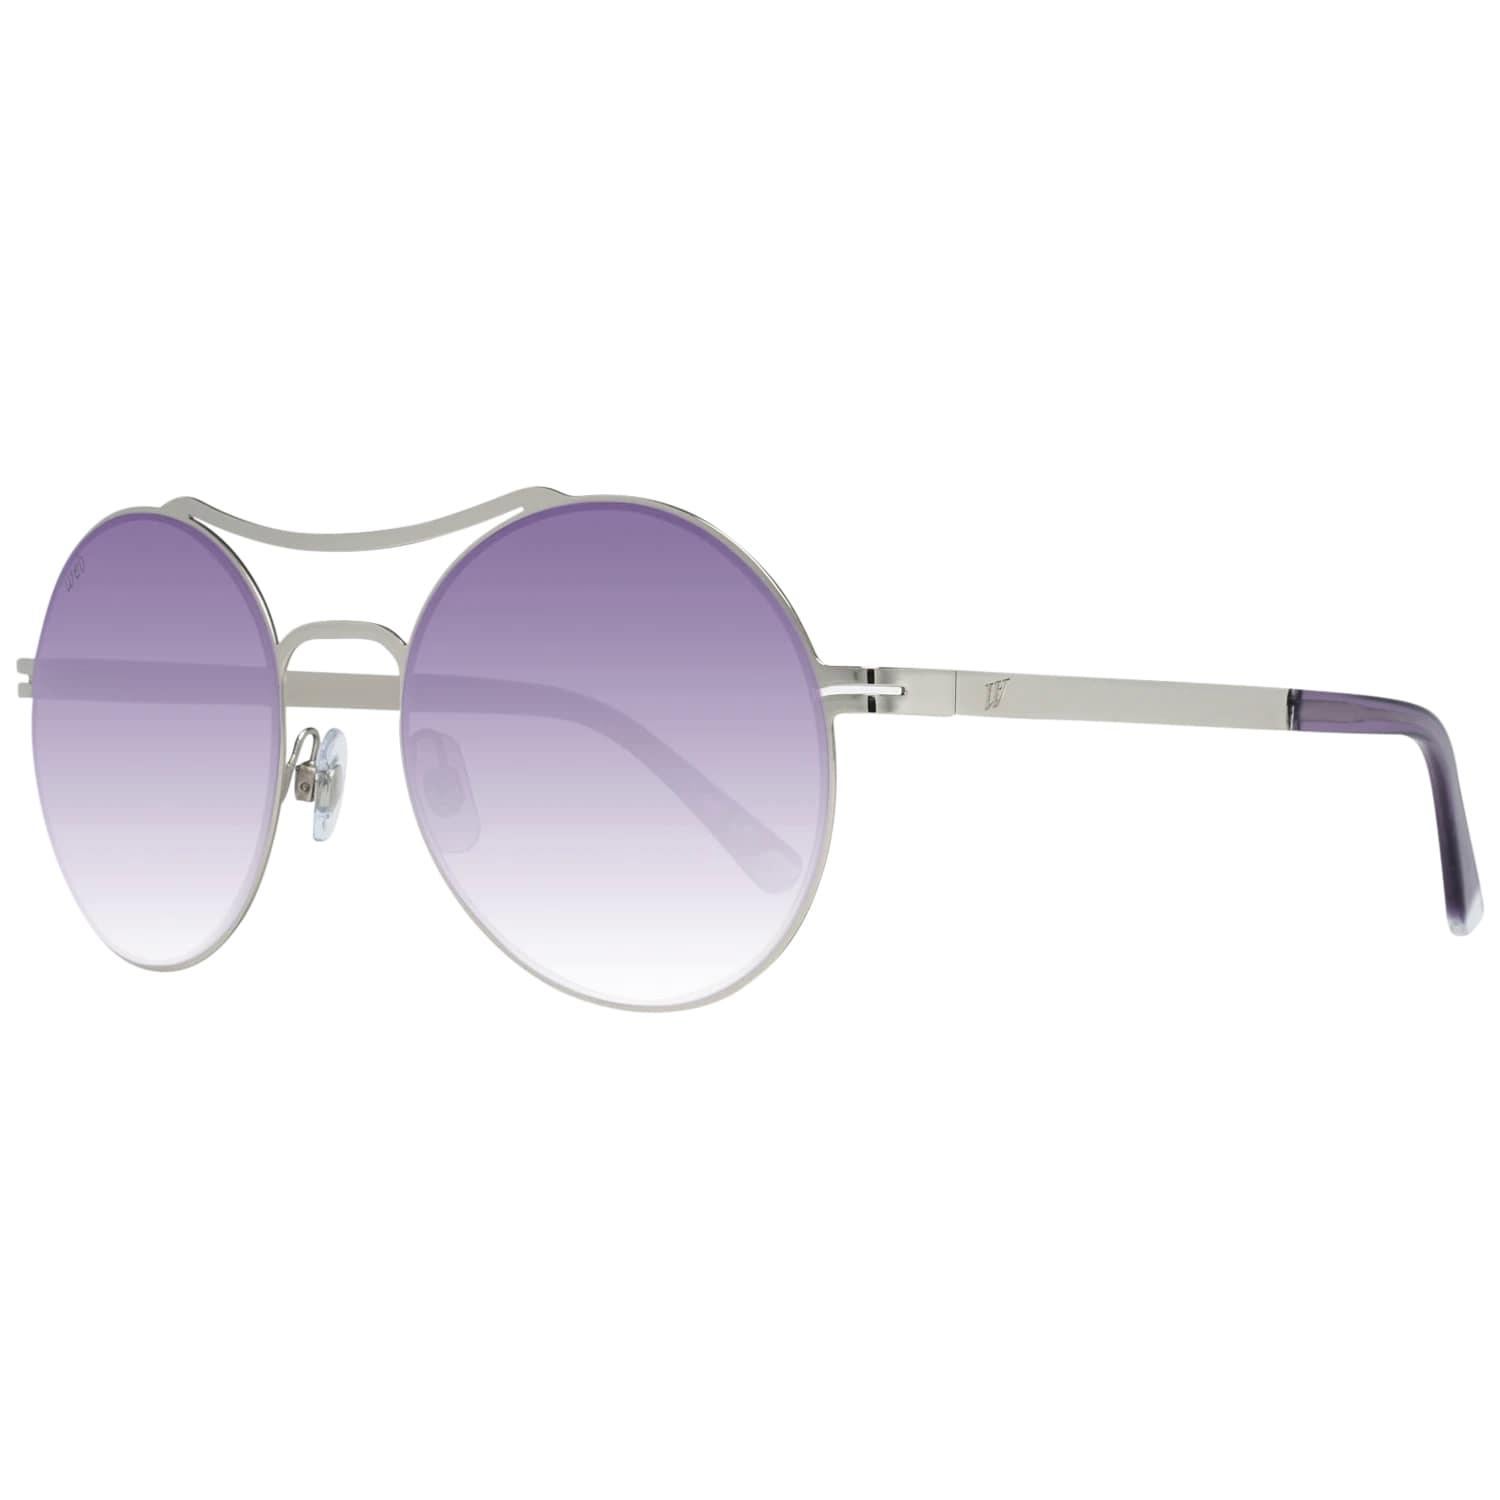 Details
MATERIAL: Metal
COLOR: Gold
MODEL: WE0171 5416Z
GENDER: Women
COUNTRY OF MANUFACTURE: China
TYPE: Sunglasses
ORIGINAL CASE?: Yes
STYLE: Round
OCCASION: Casual
FEATURES: Lightweight
LENS COLOR: Purple
LENS TECHNOLOGY: Gradient
YEAR